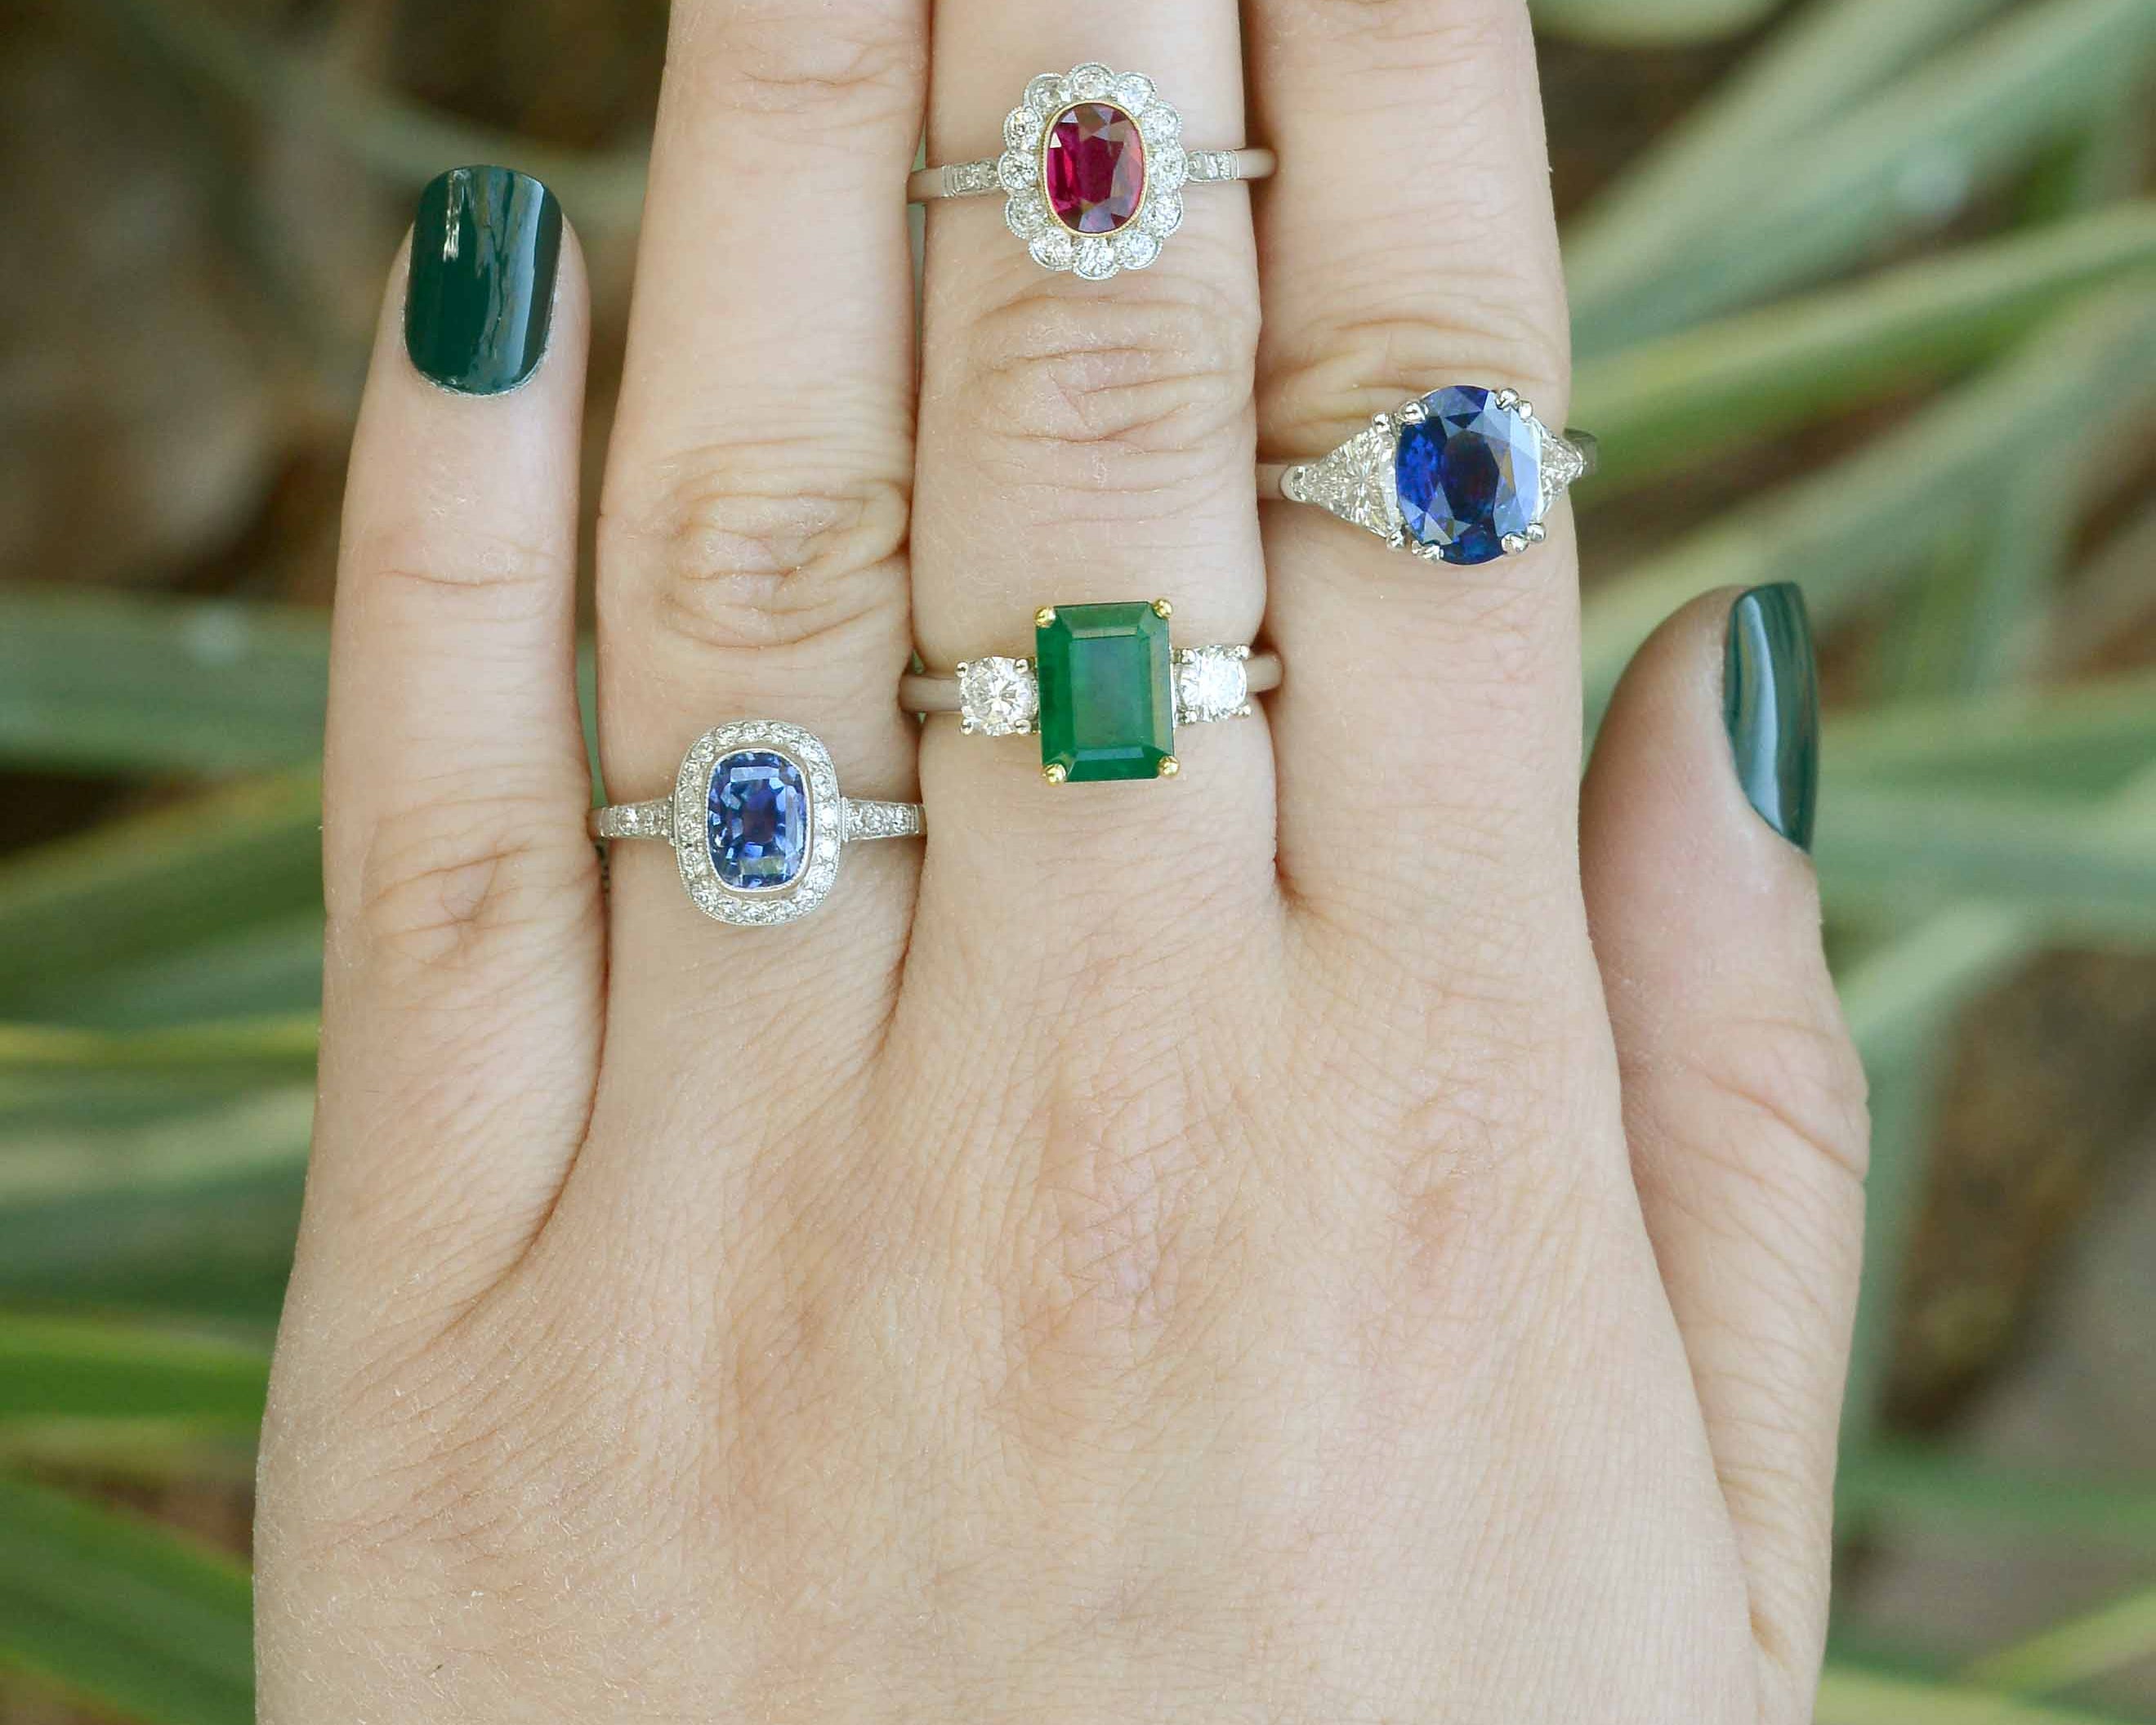 Some of the sapphire, ruby & emerald wedding rings we have in-store.